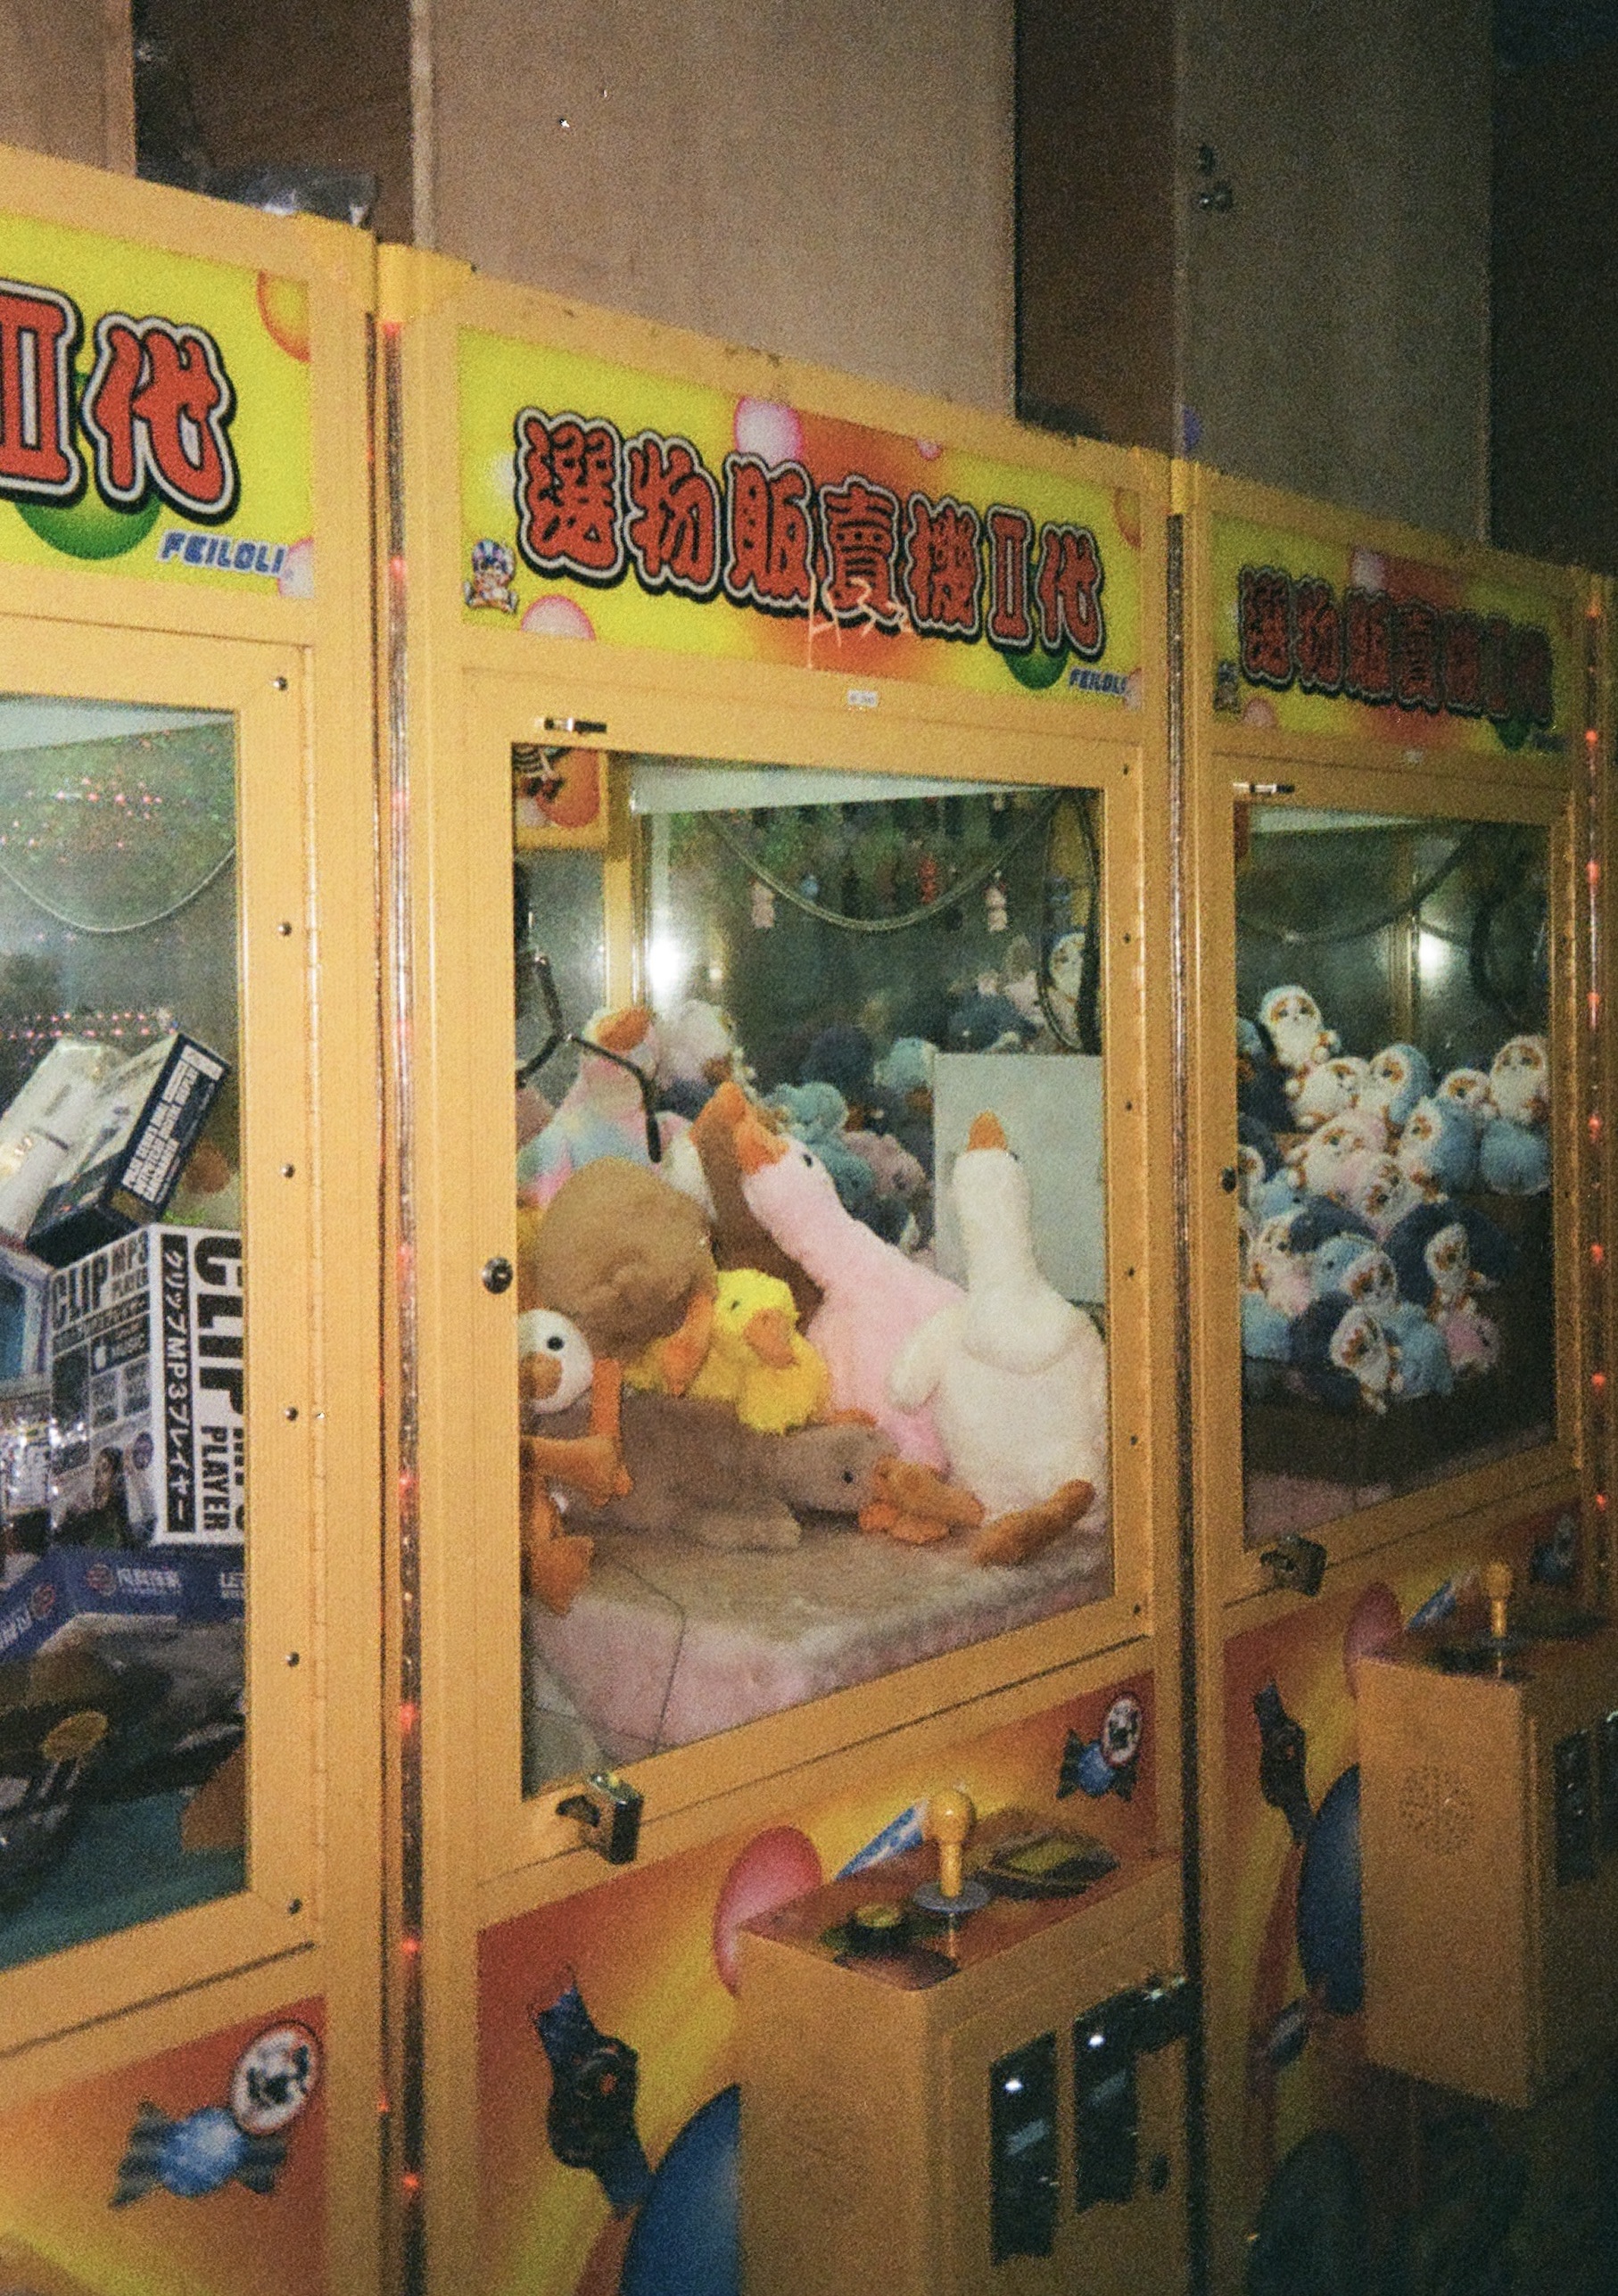 Toy grabbing machine with duck plushies